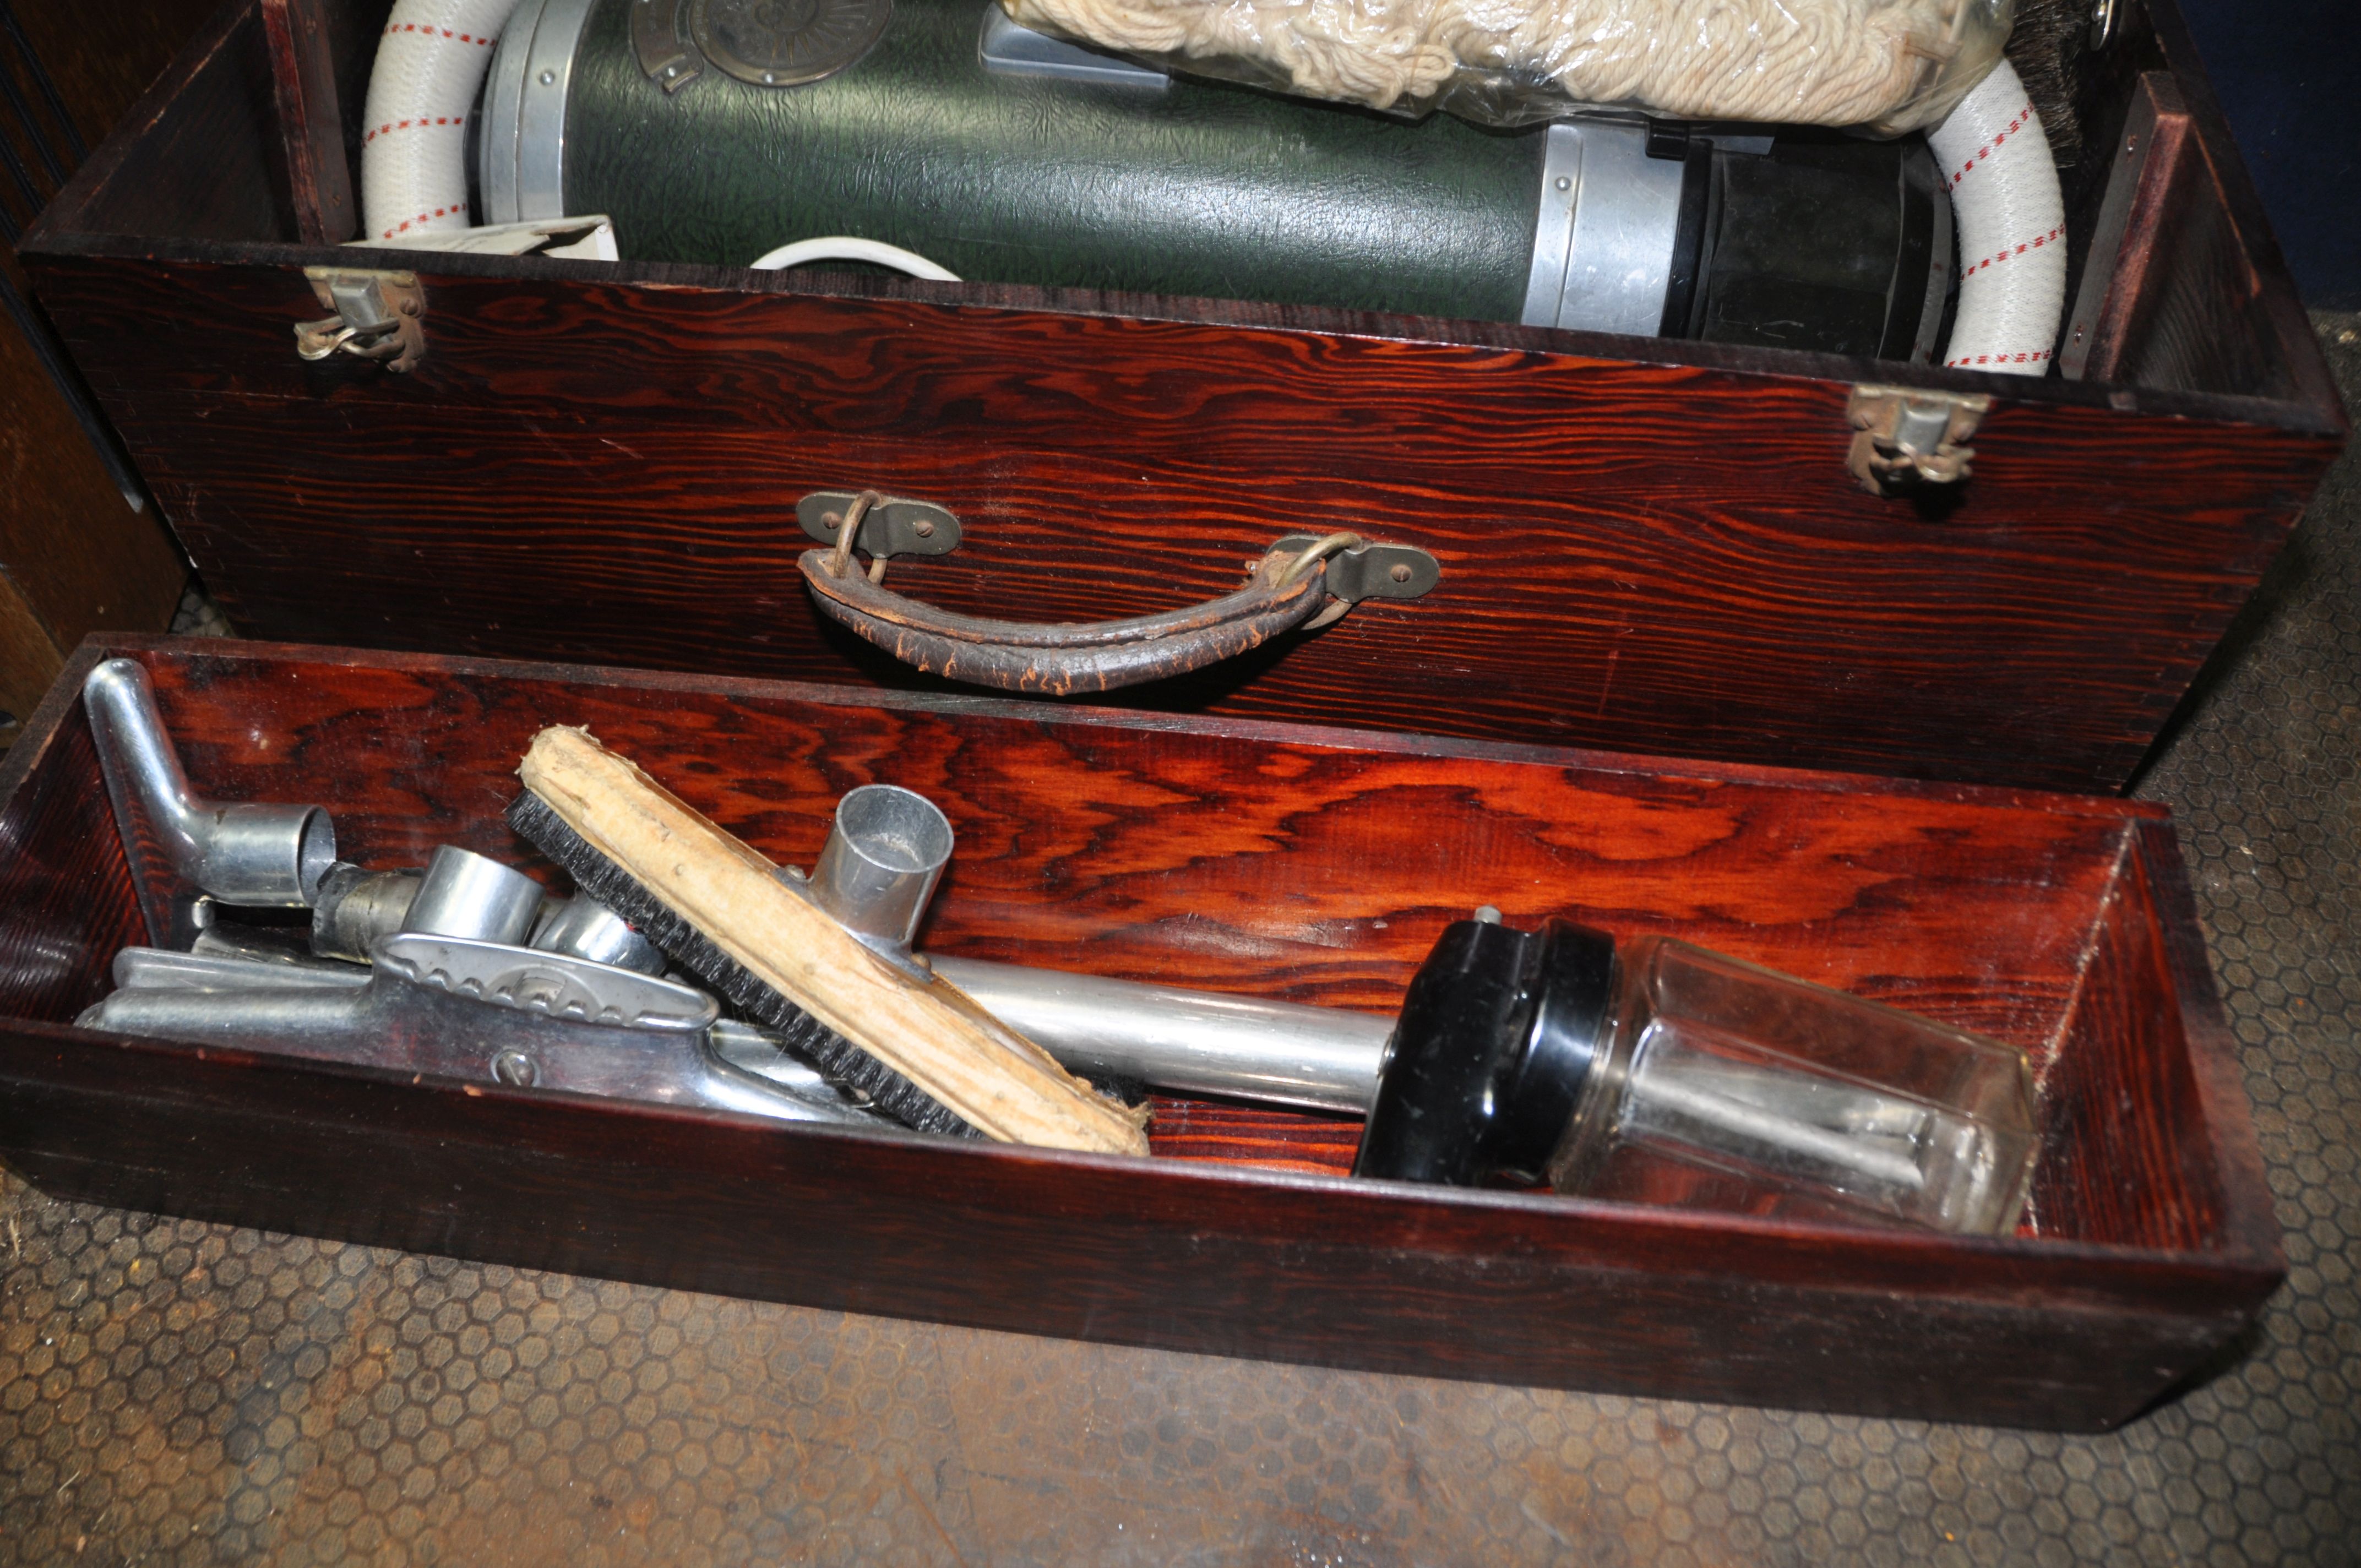 MID 20th CENTURY ELECTRICAL ITEMS comprising od an Electrolux Vacuum cleaner in wooden box with - Image 3 of 5